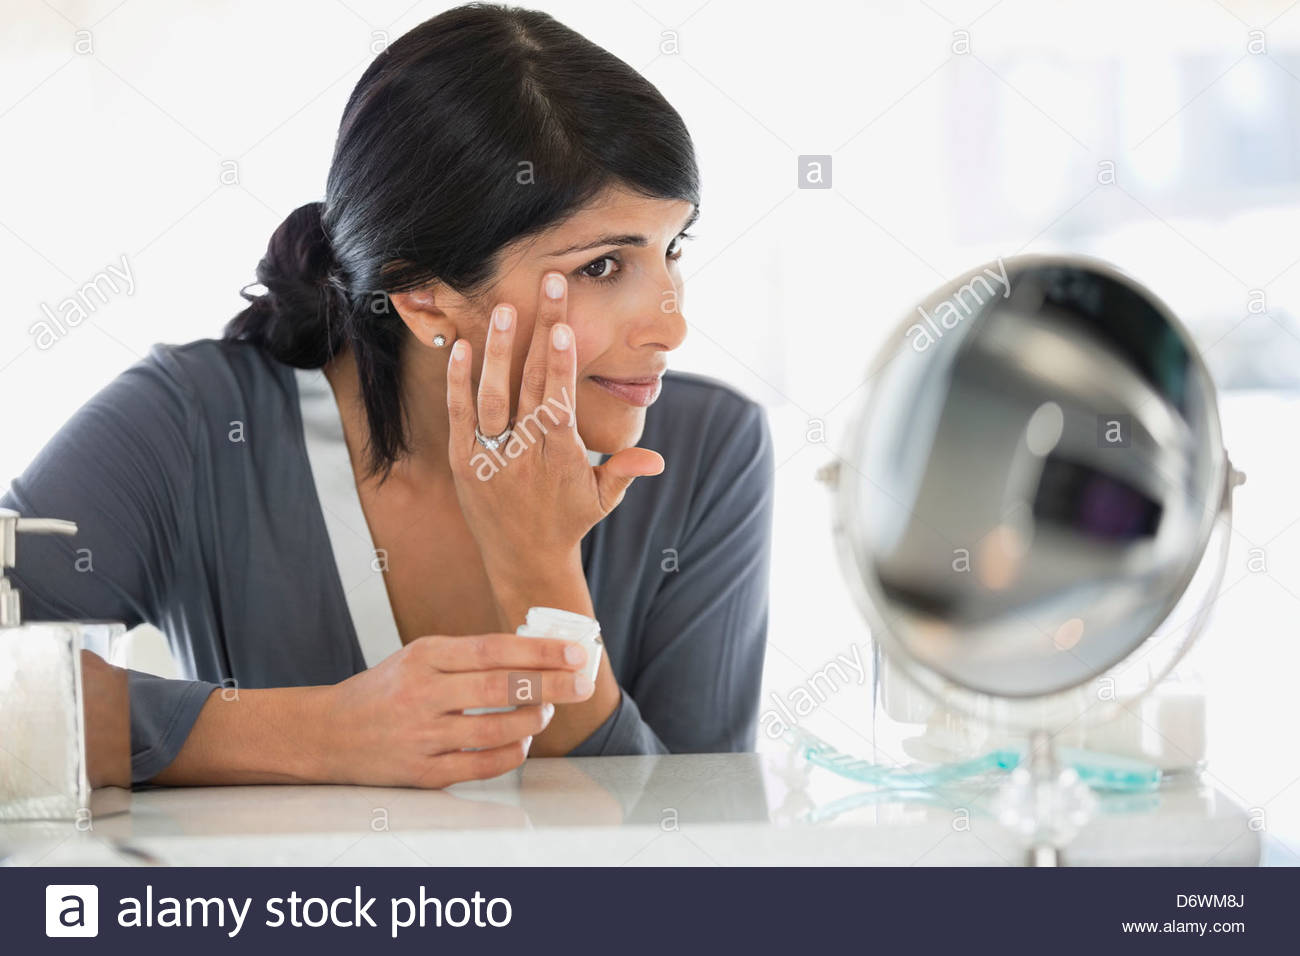 Beautiful mature woman applying cream on face at dressing table Stock Photo